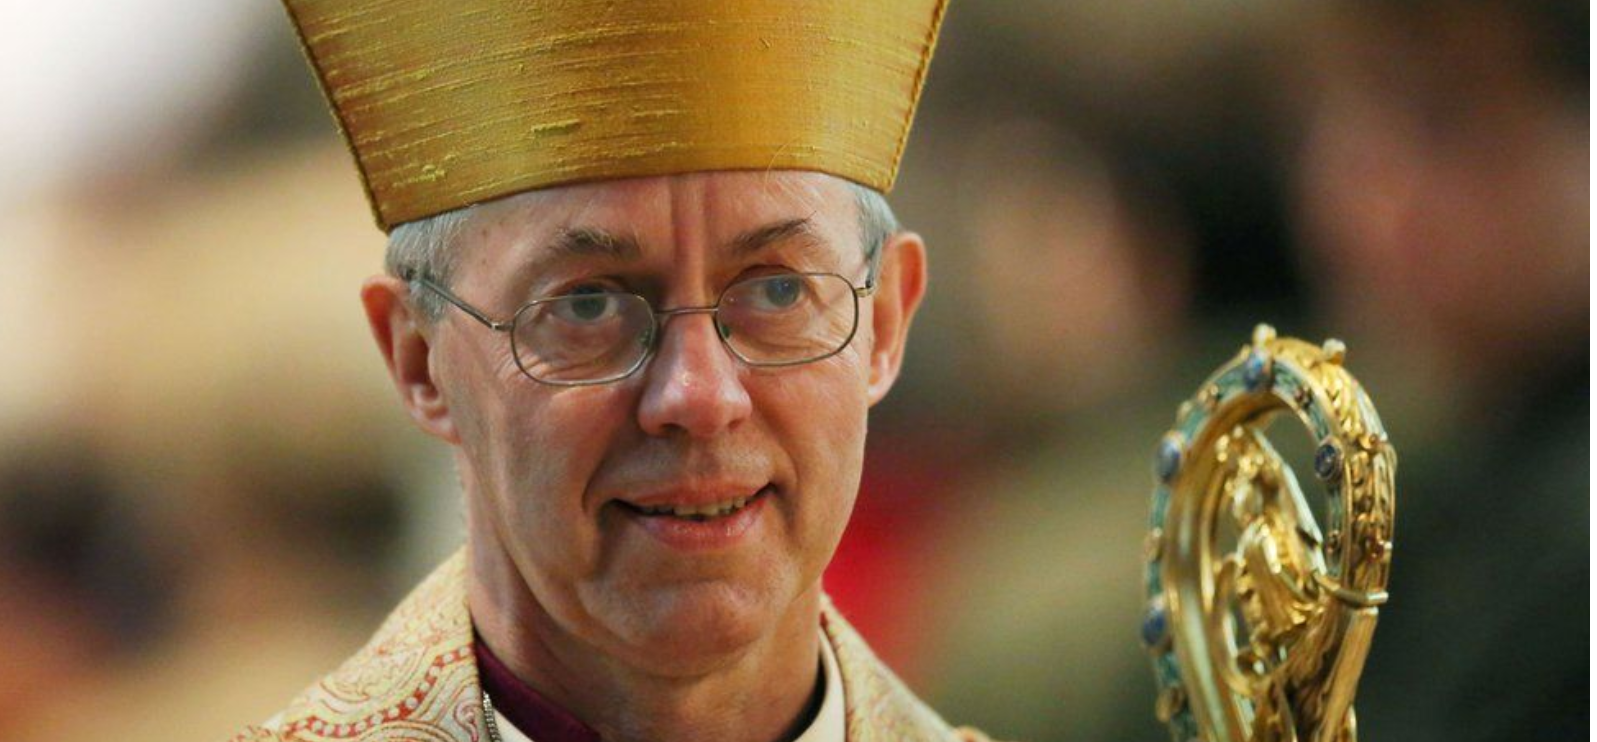 Justin Wilby, the Archbishop of Canterbury